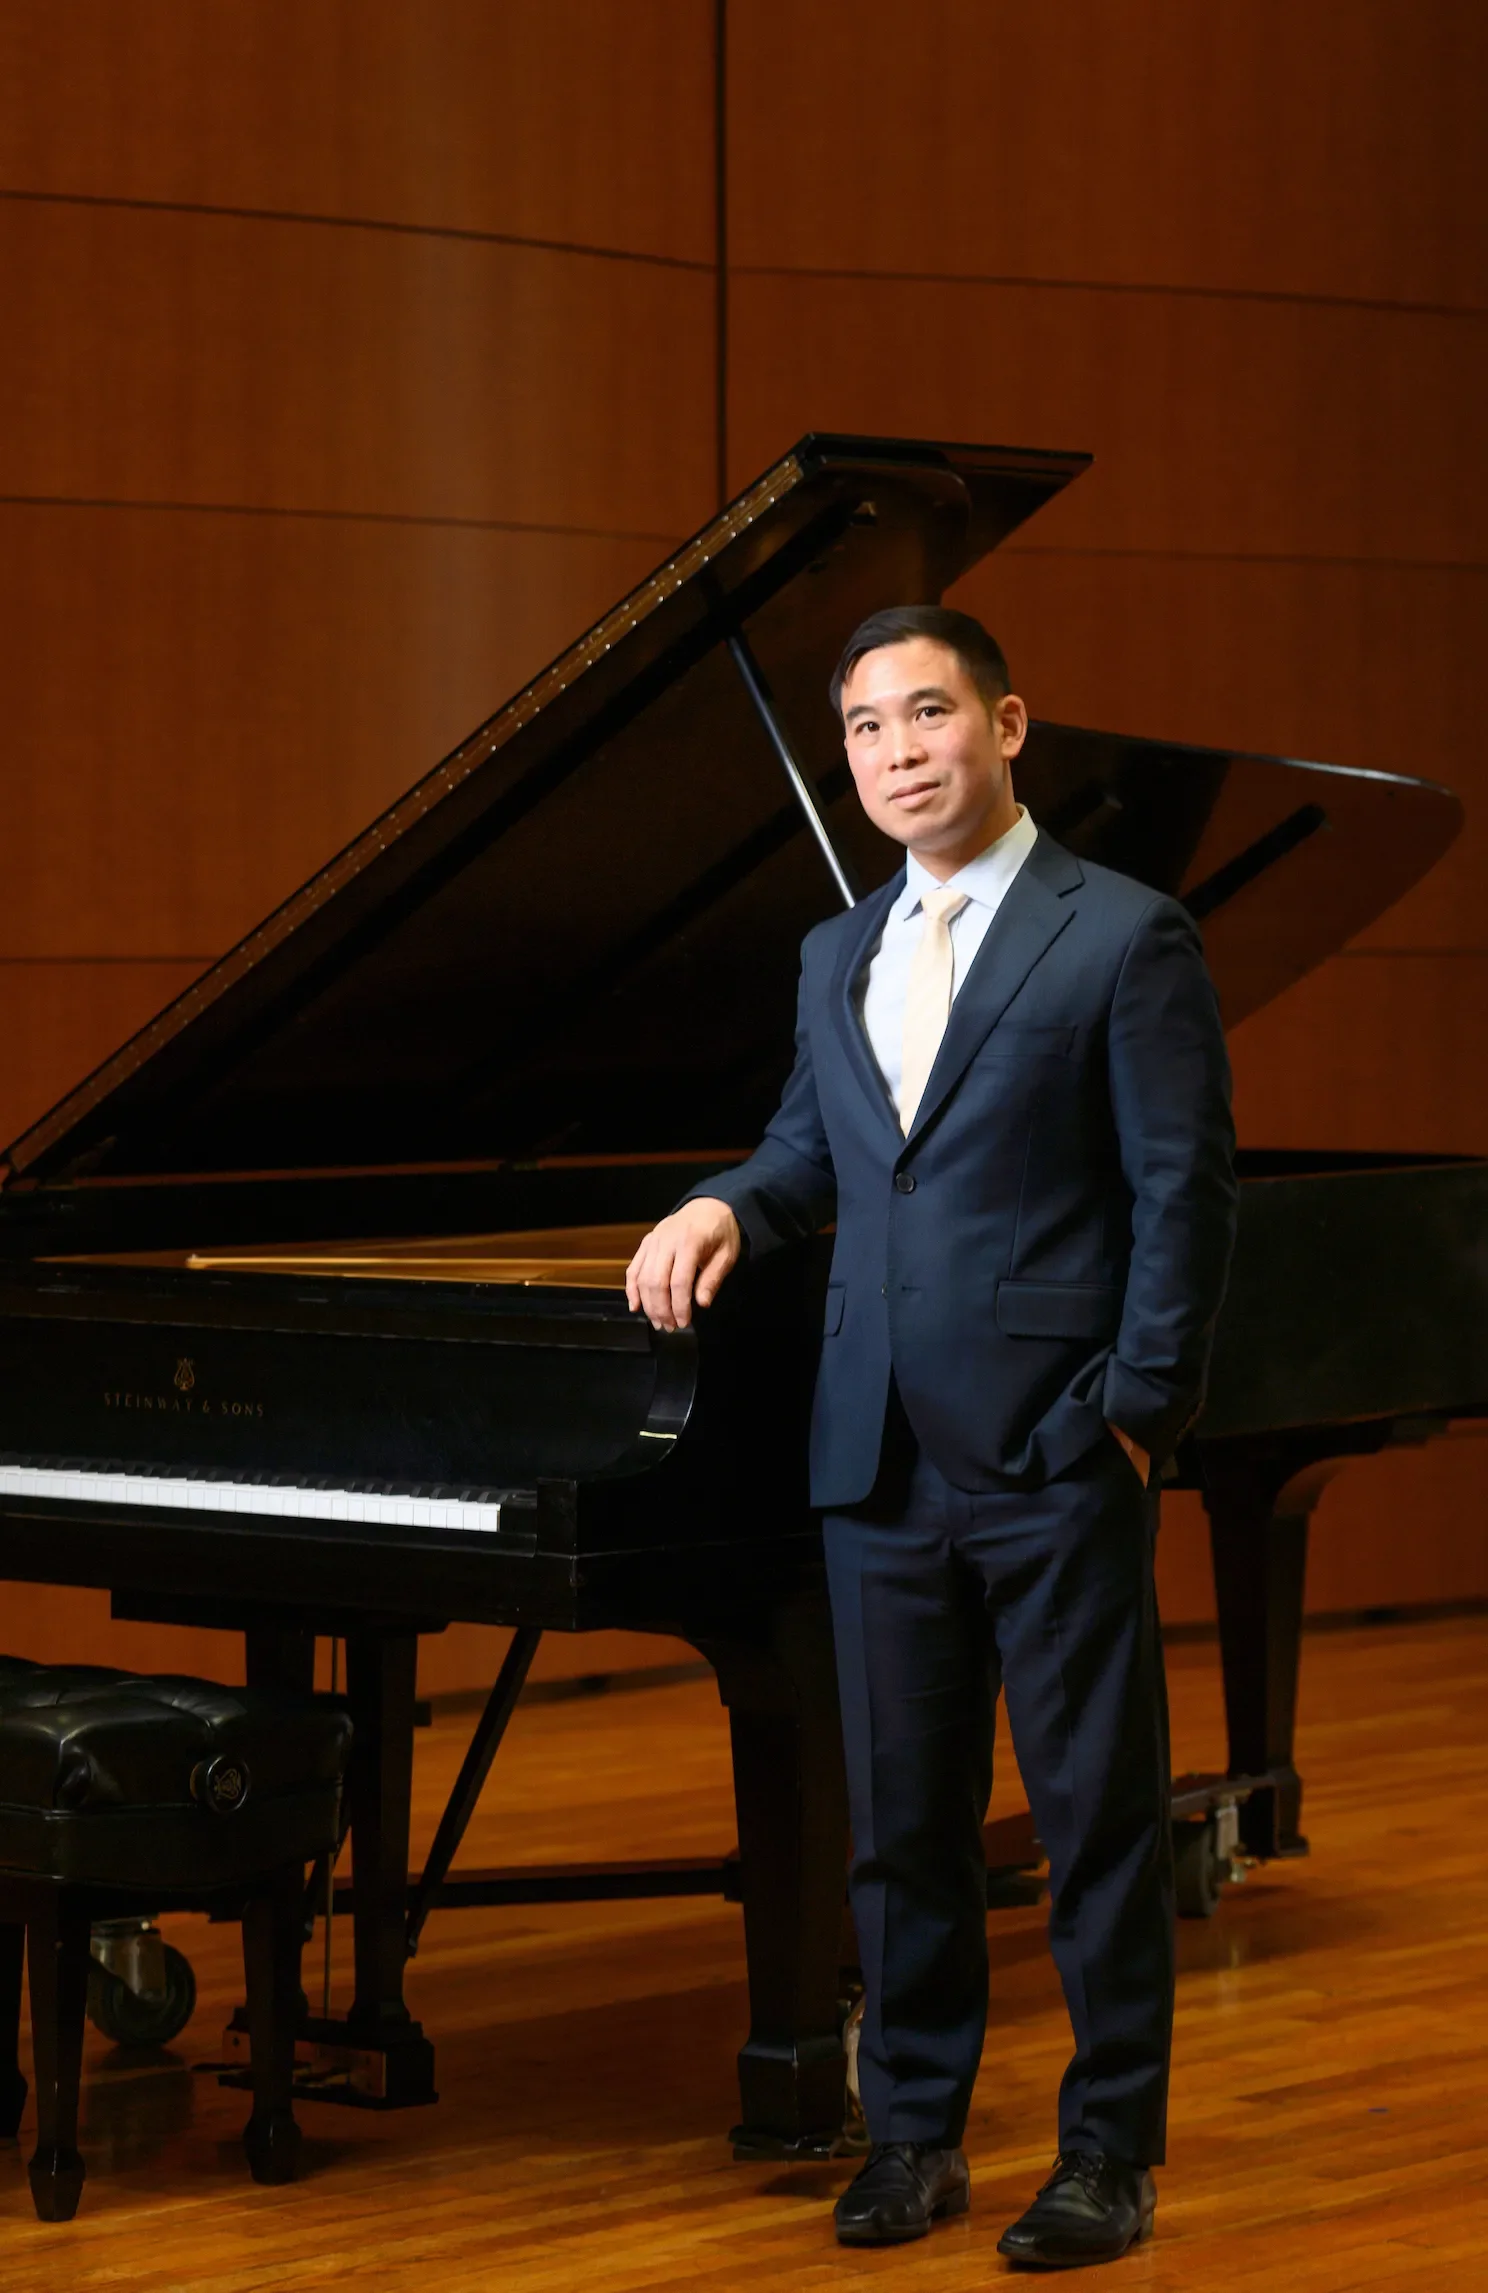 Dr. Henry Wong Doe of the IUP Music Department performs on the piano during a video production for an IUP brand story in Gorrell Recital Hall on March 30, 2023.